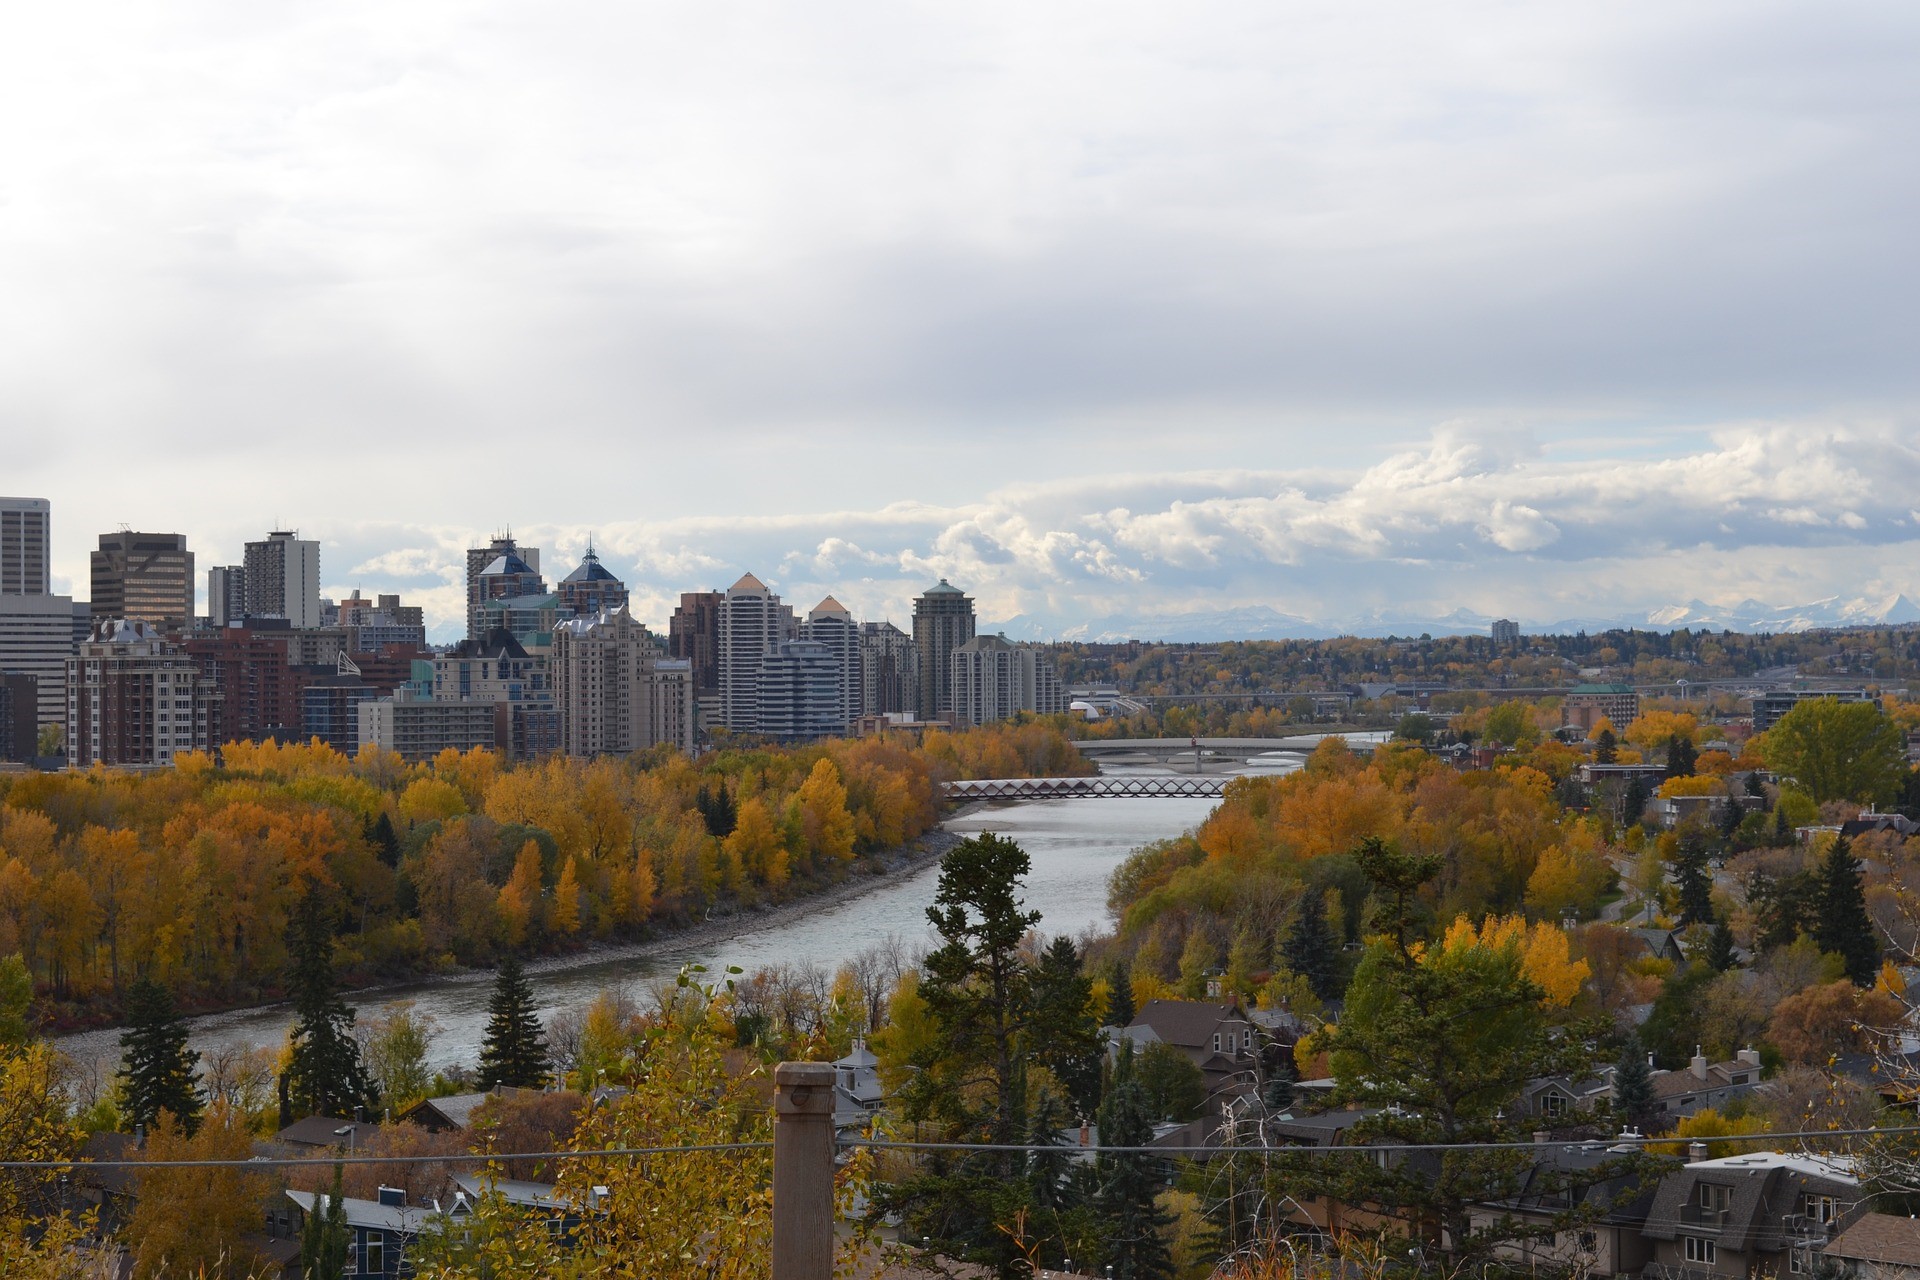 a view of the Calgary, Alberta skyline and Bow River with fall foliage